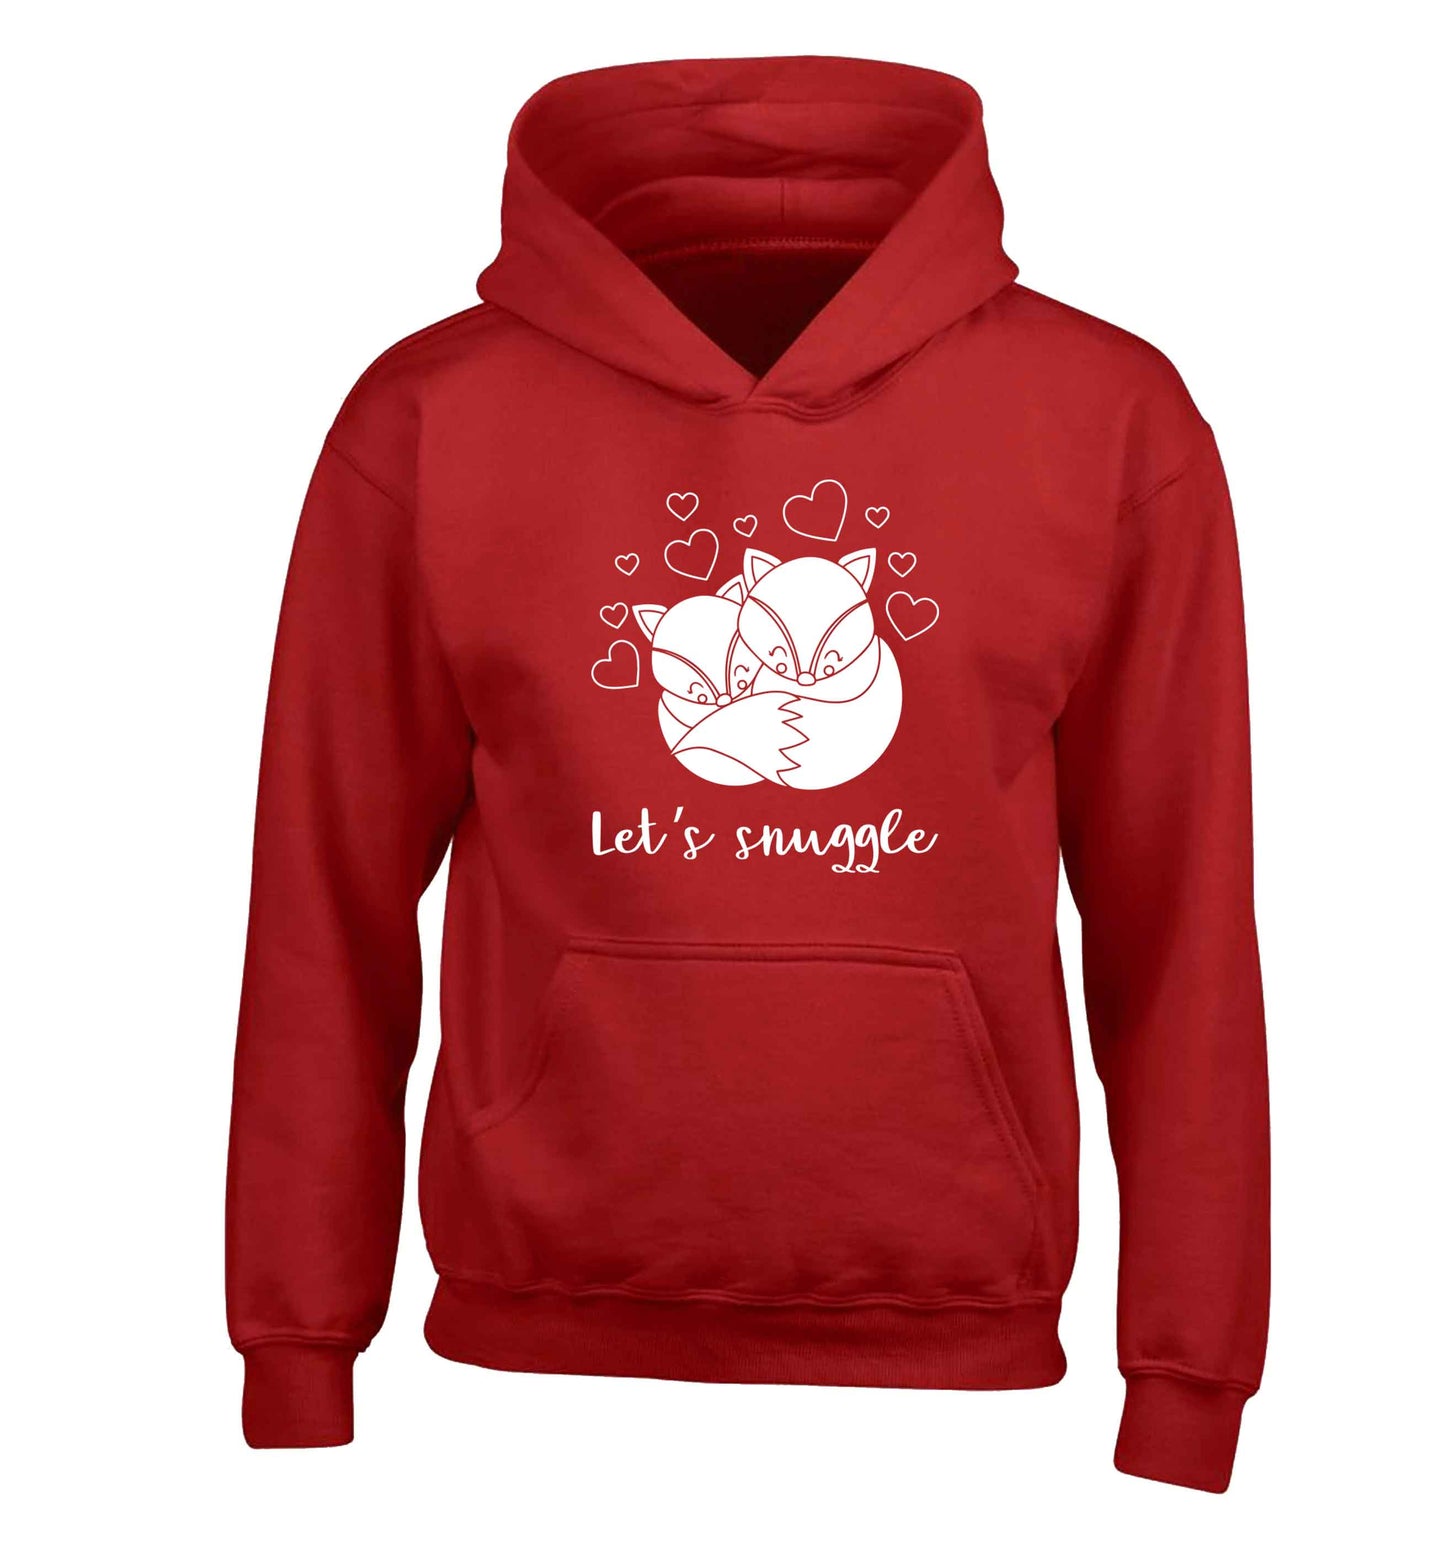 Let's snuggle children's red hoodie 12-13 Years